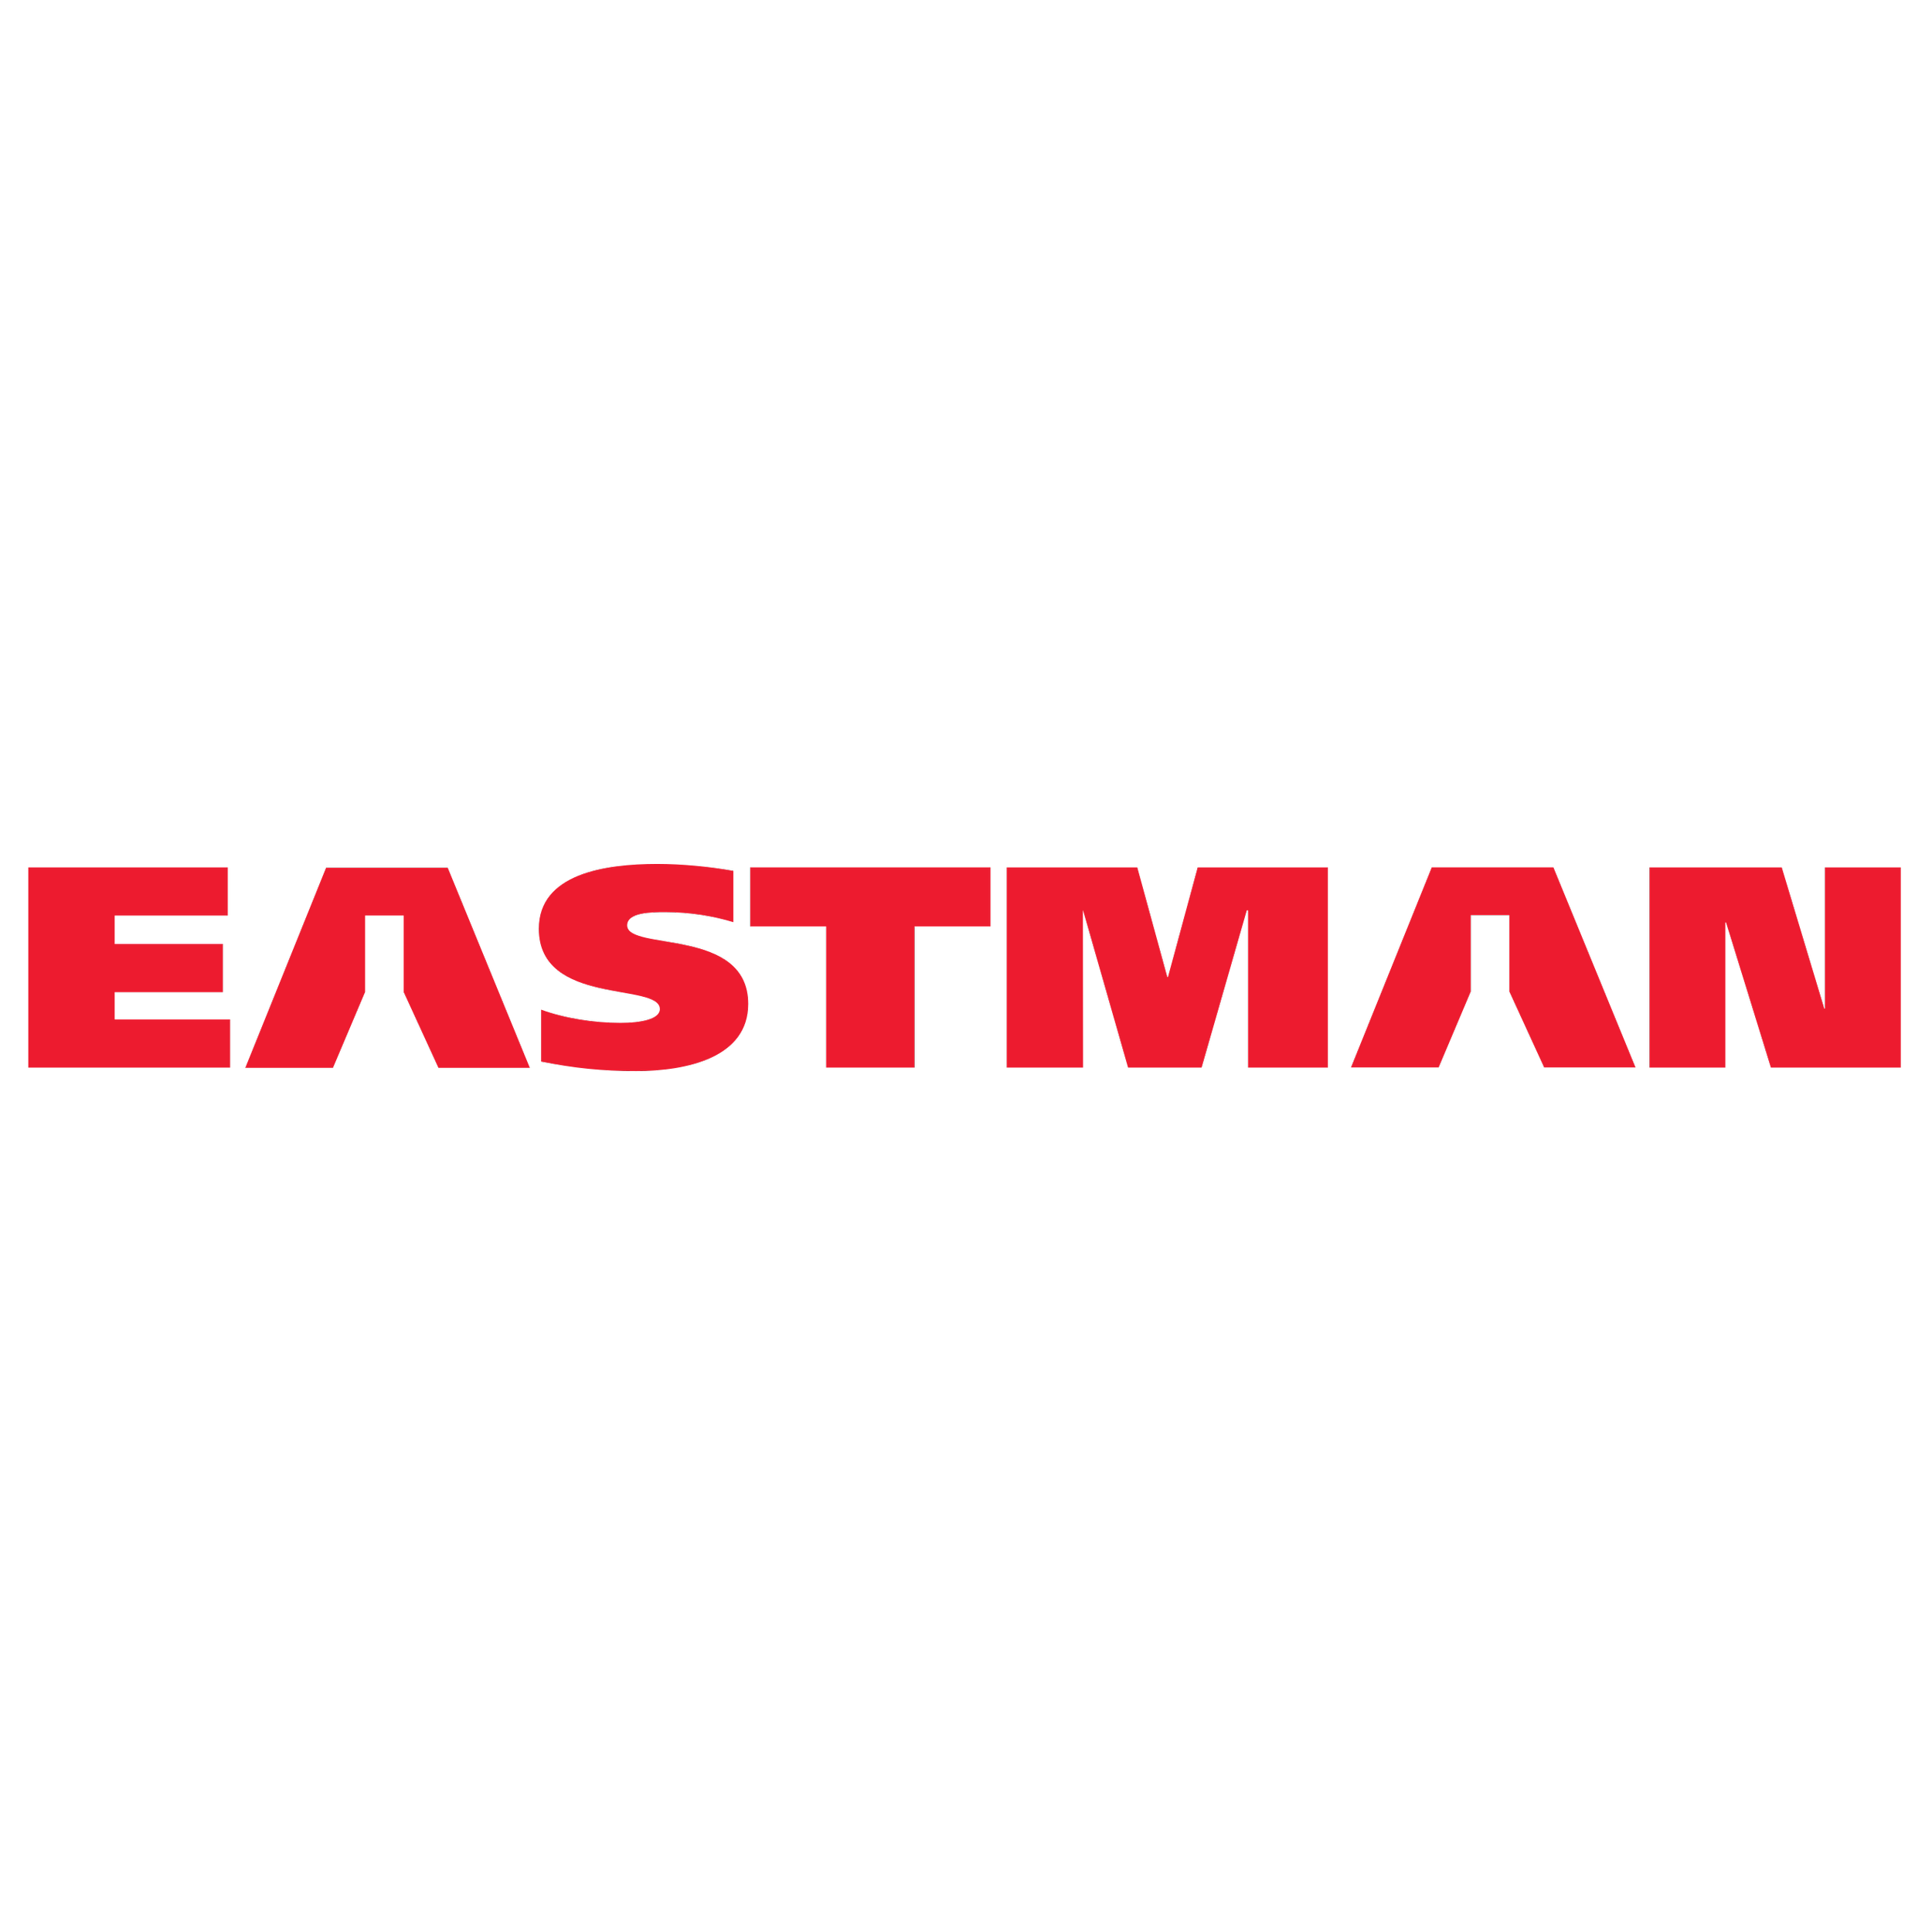 Eastman_Square.png